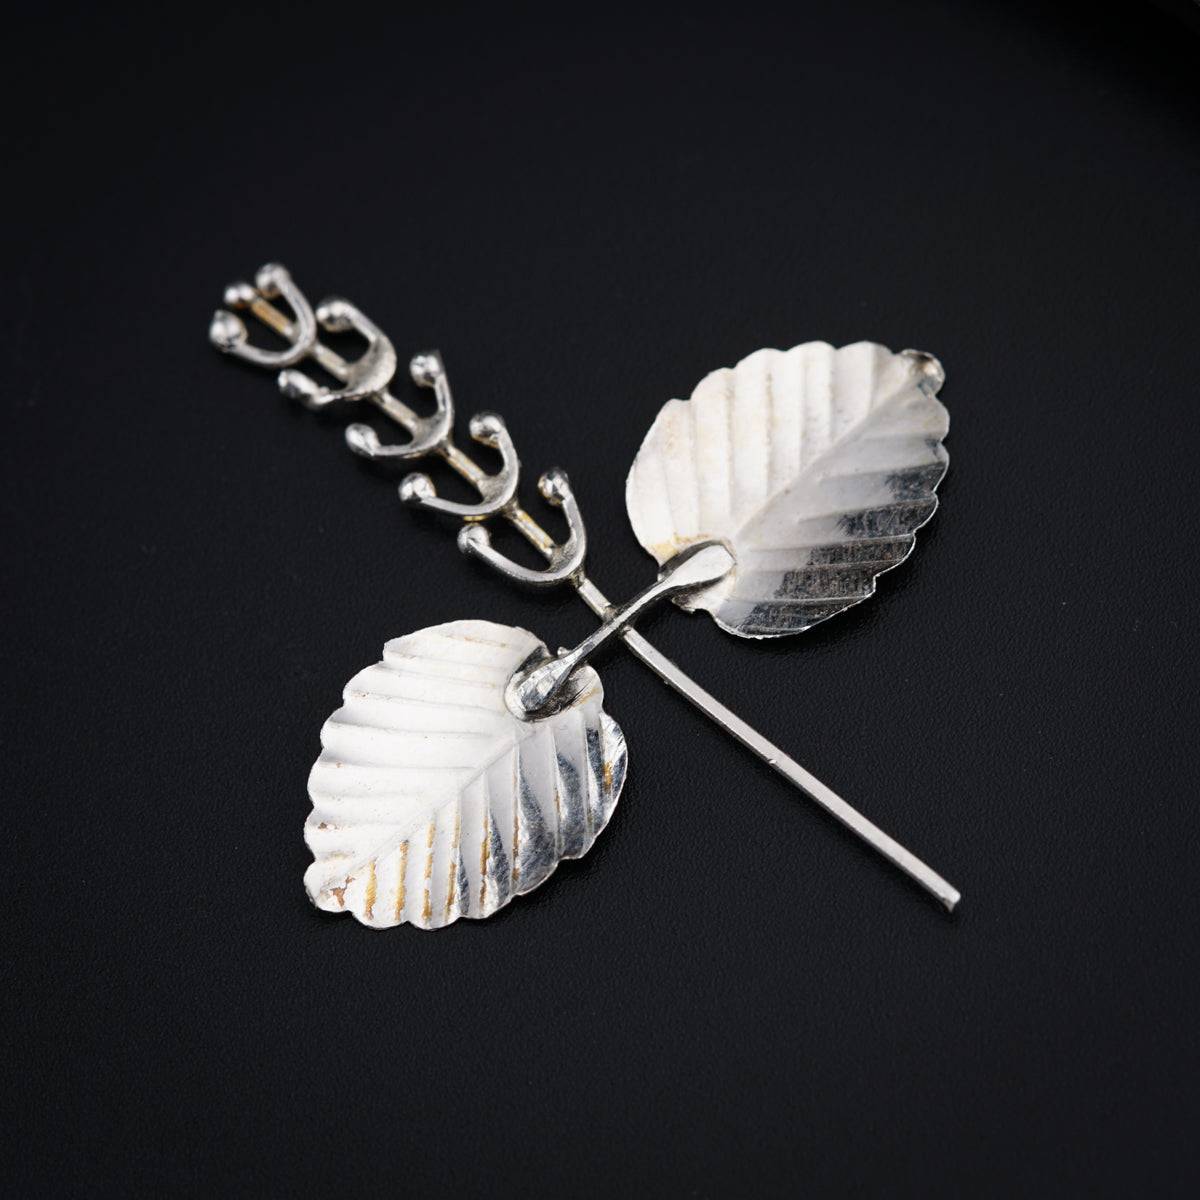 a silver brooch with a leaf on it